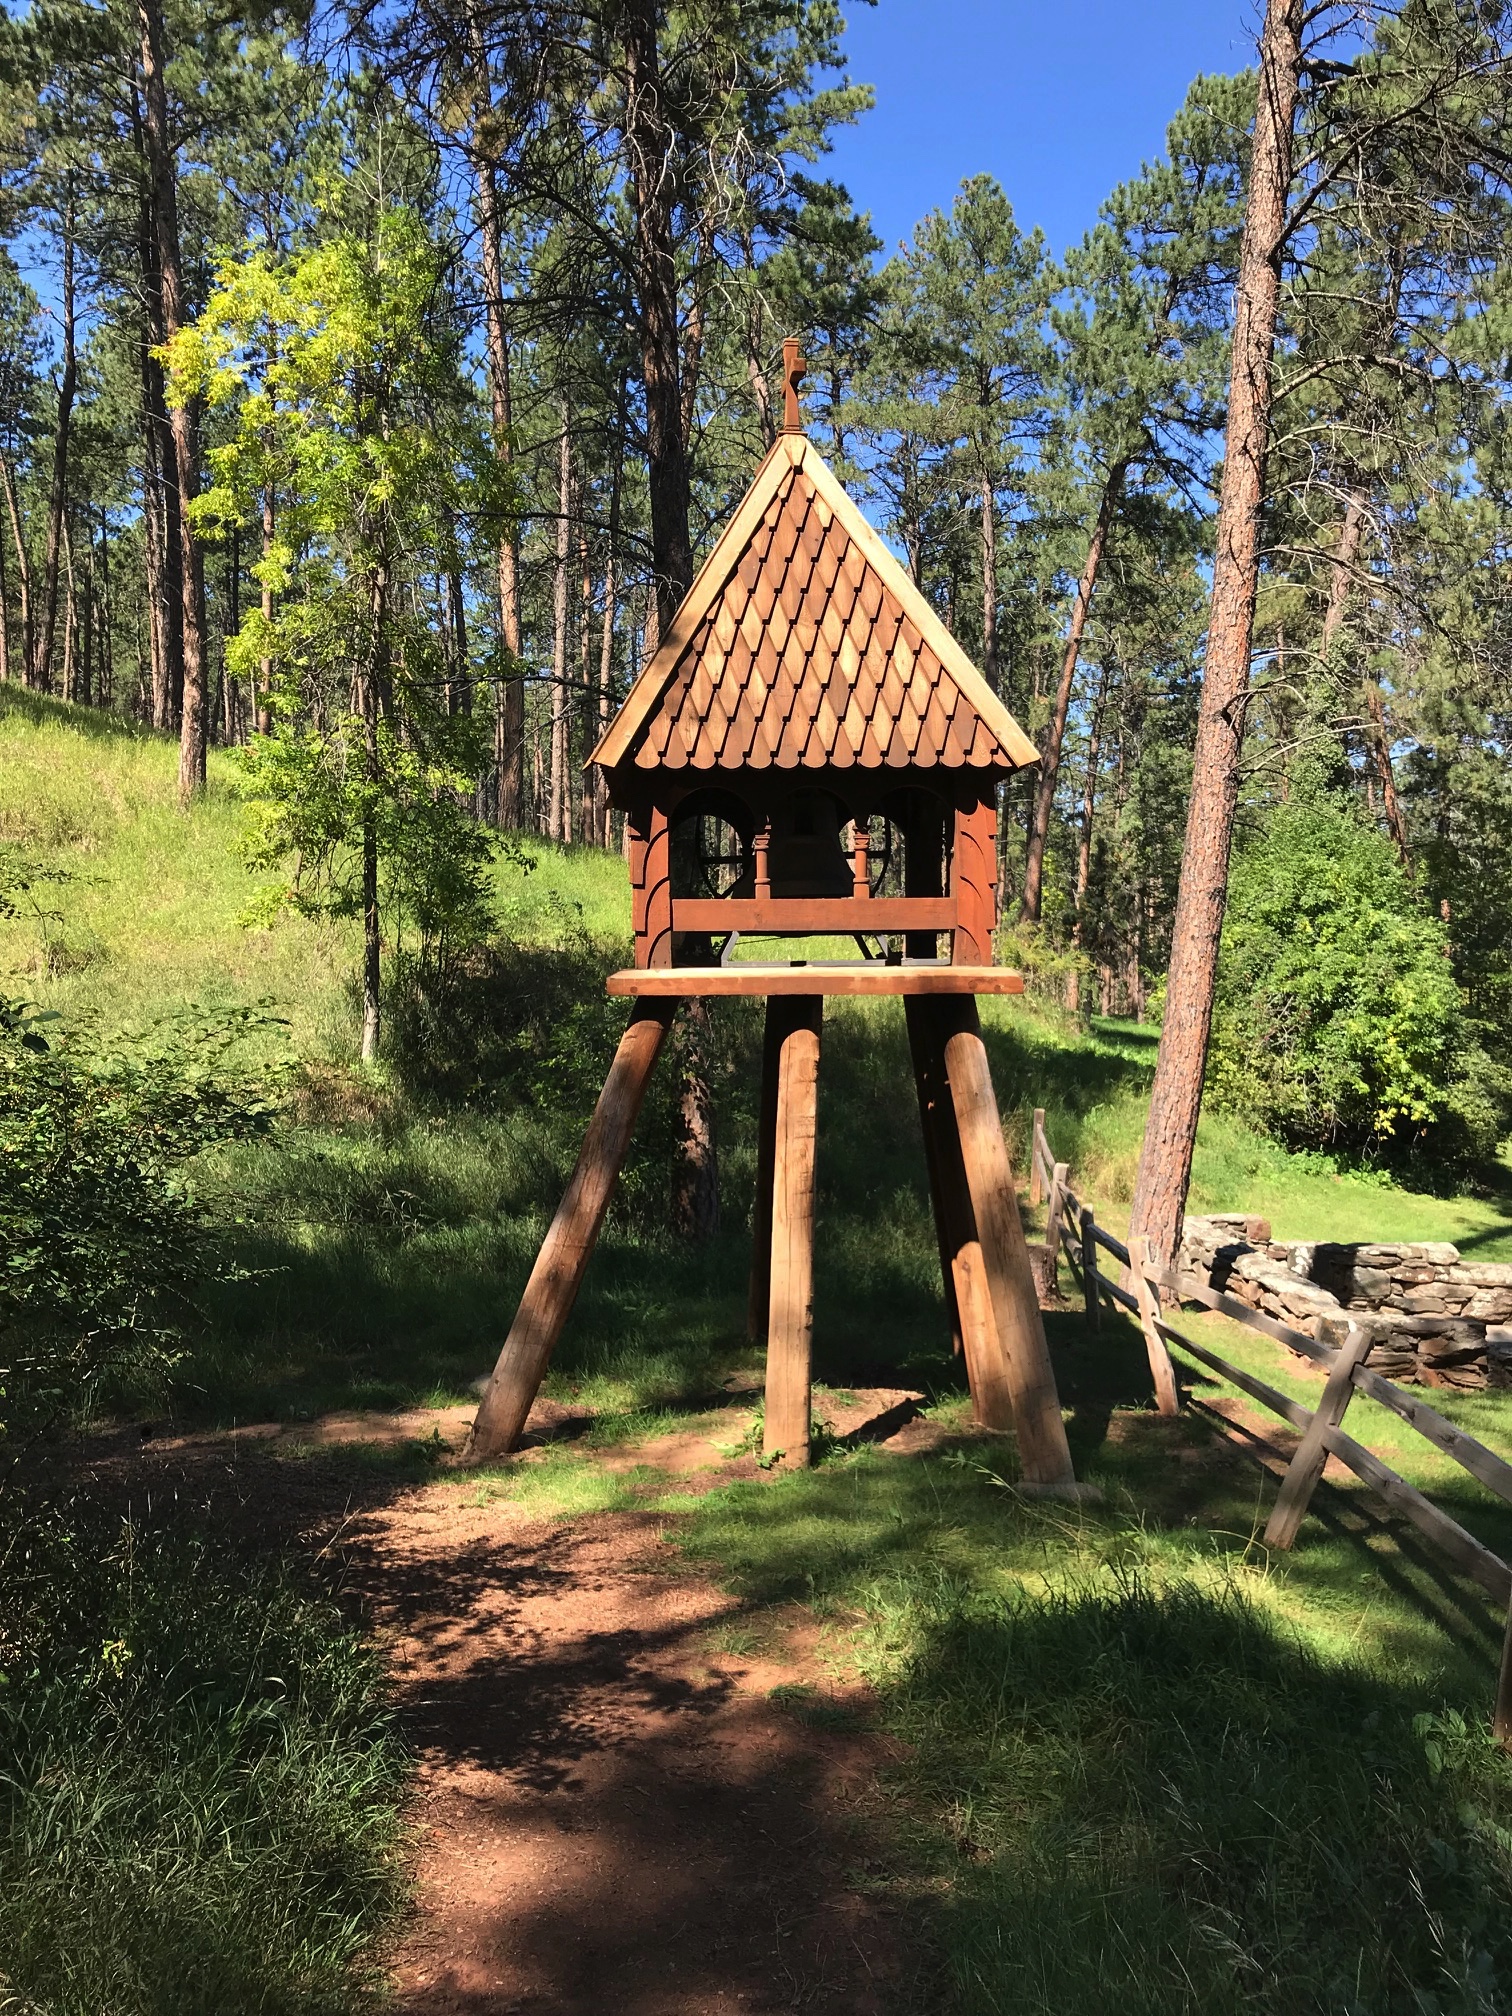 A wooden, bell tower sits on a dirt path in the woods